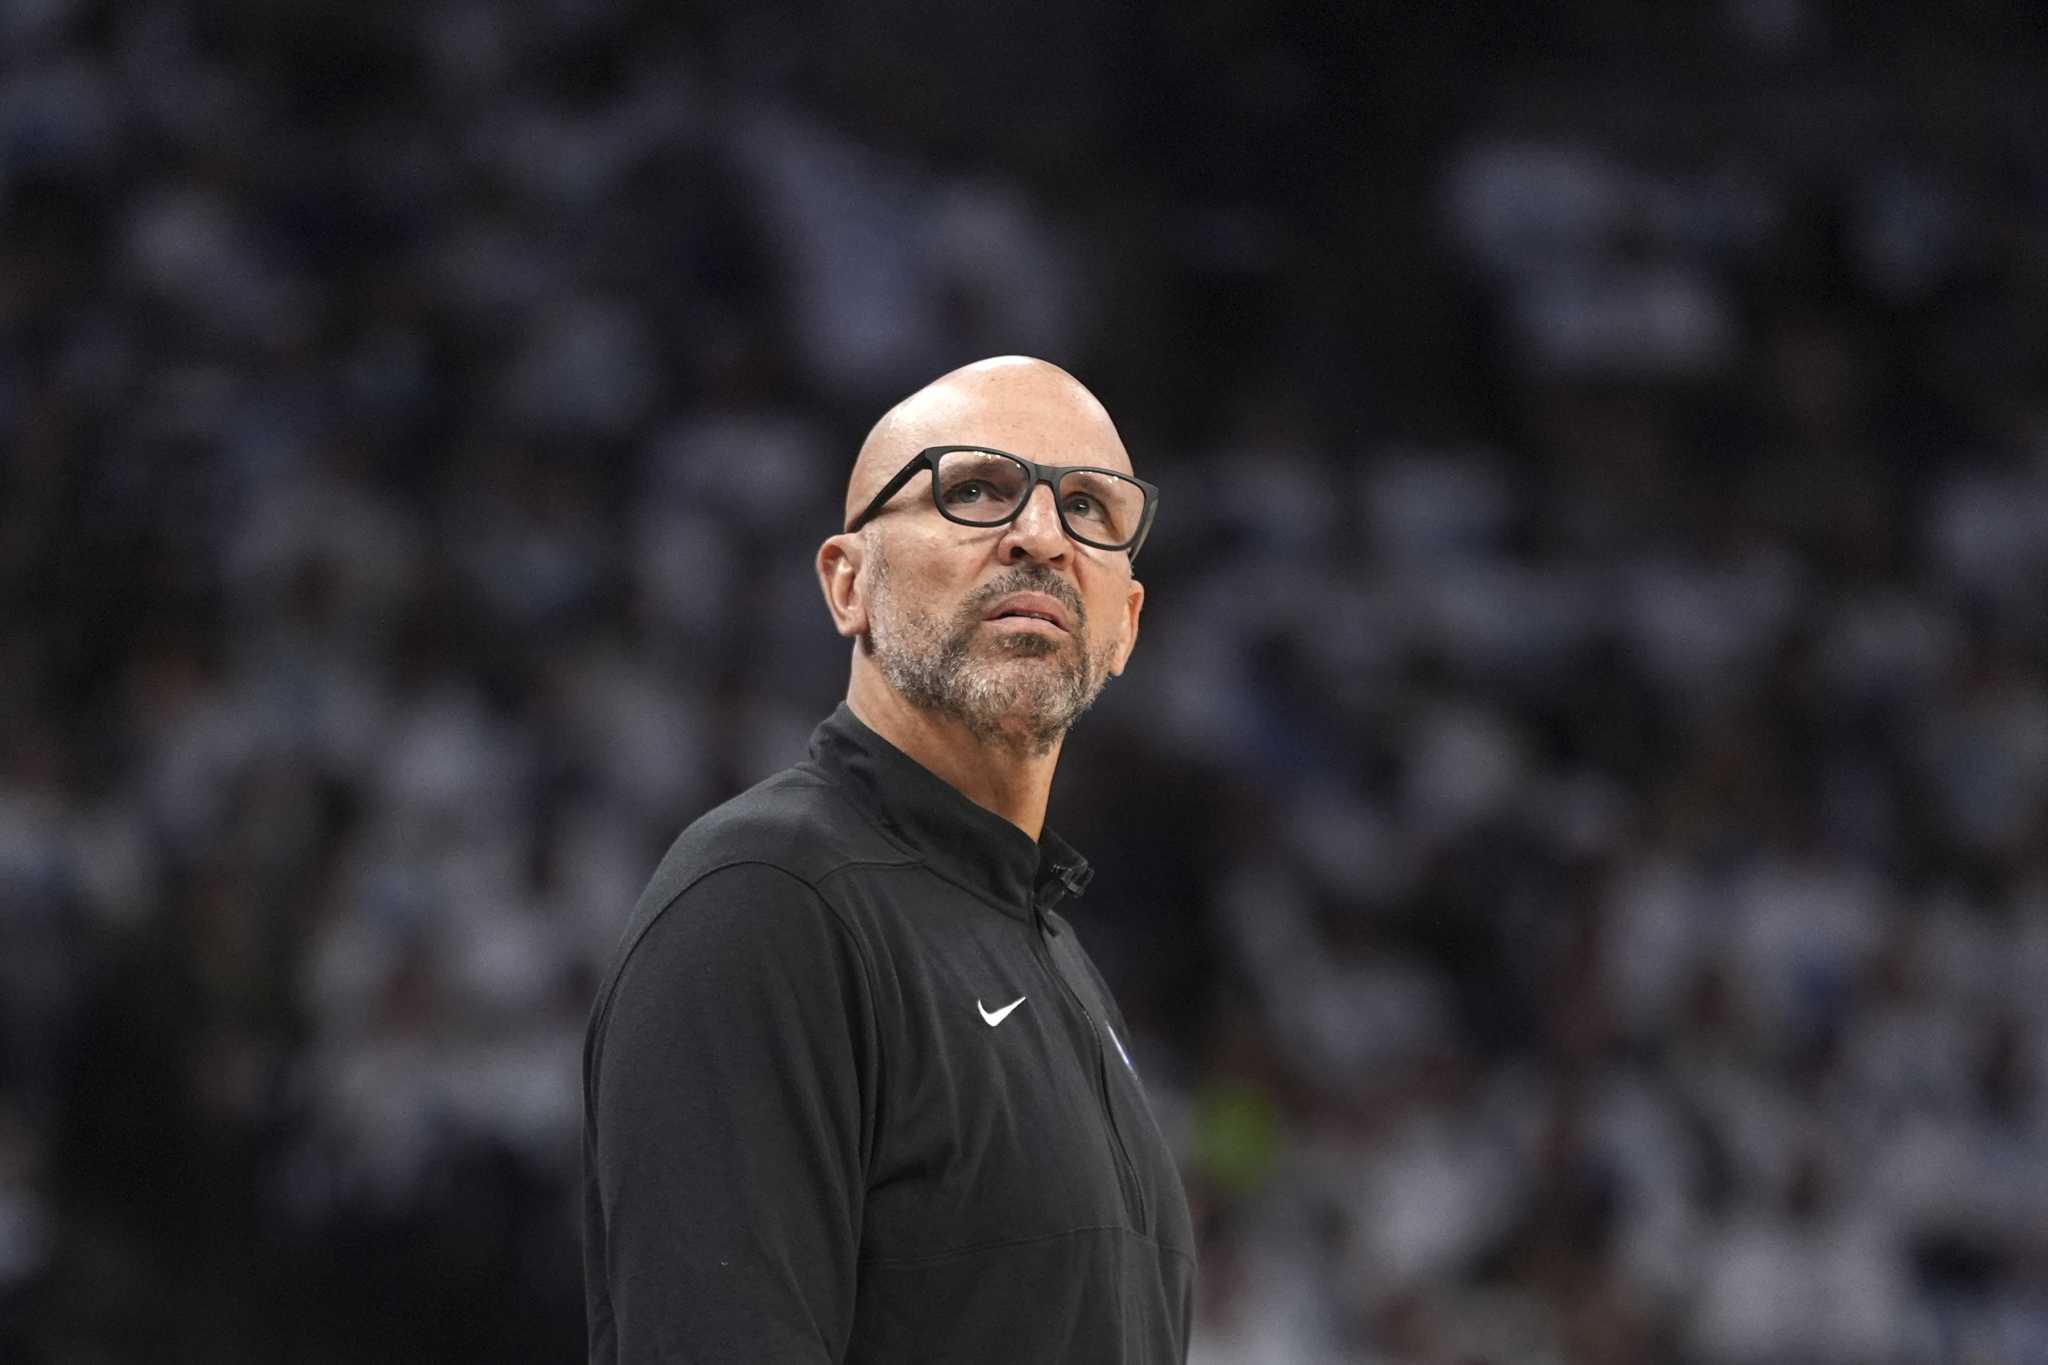 Jason Kidd has a chance to join a very small club in these NBA Finals